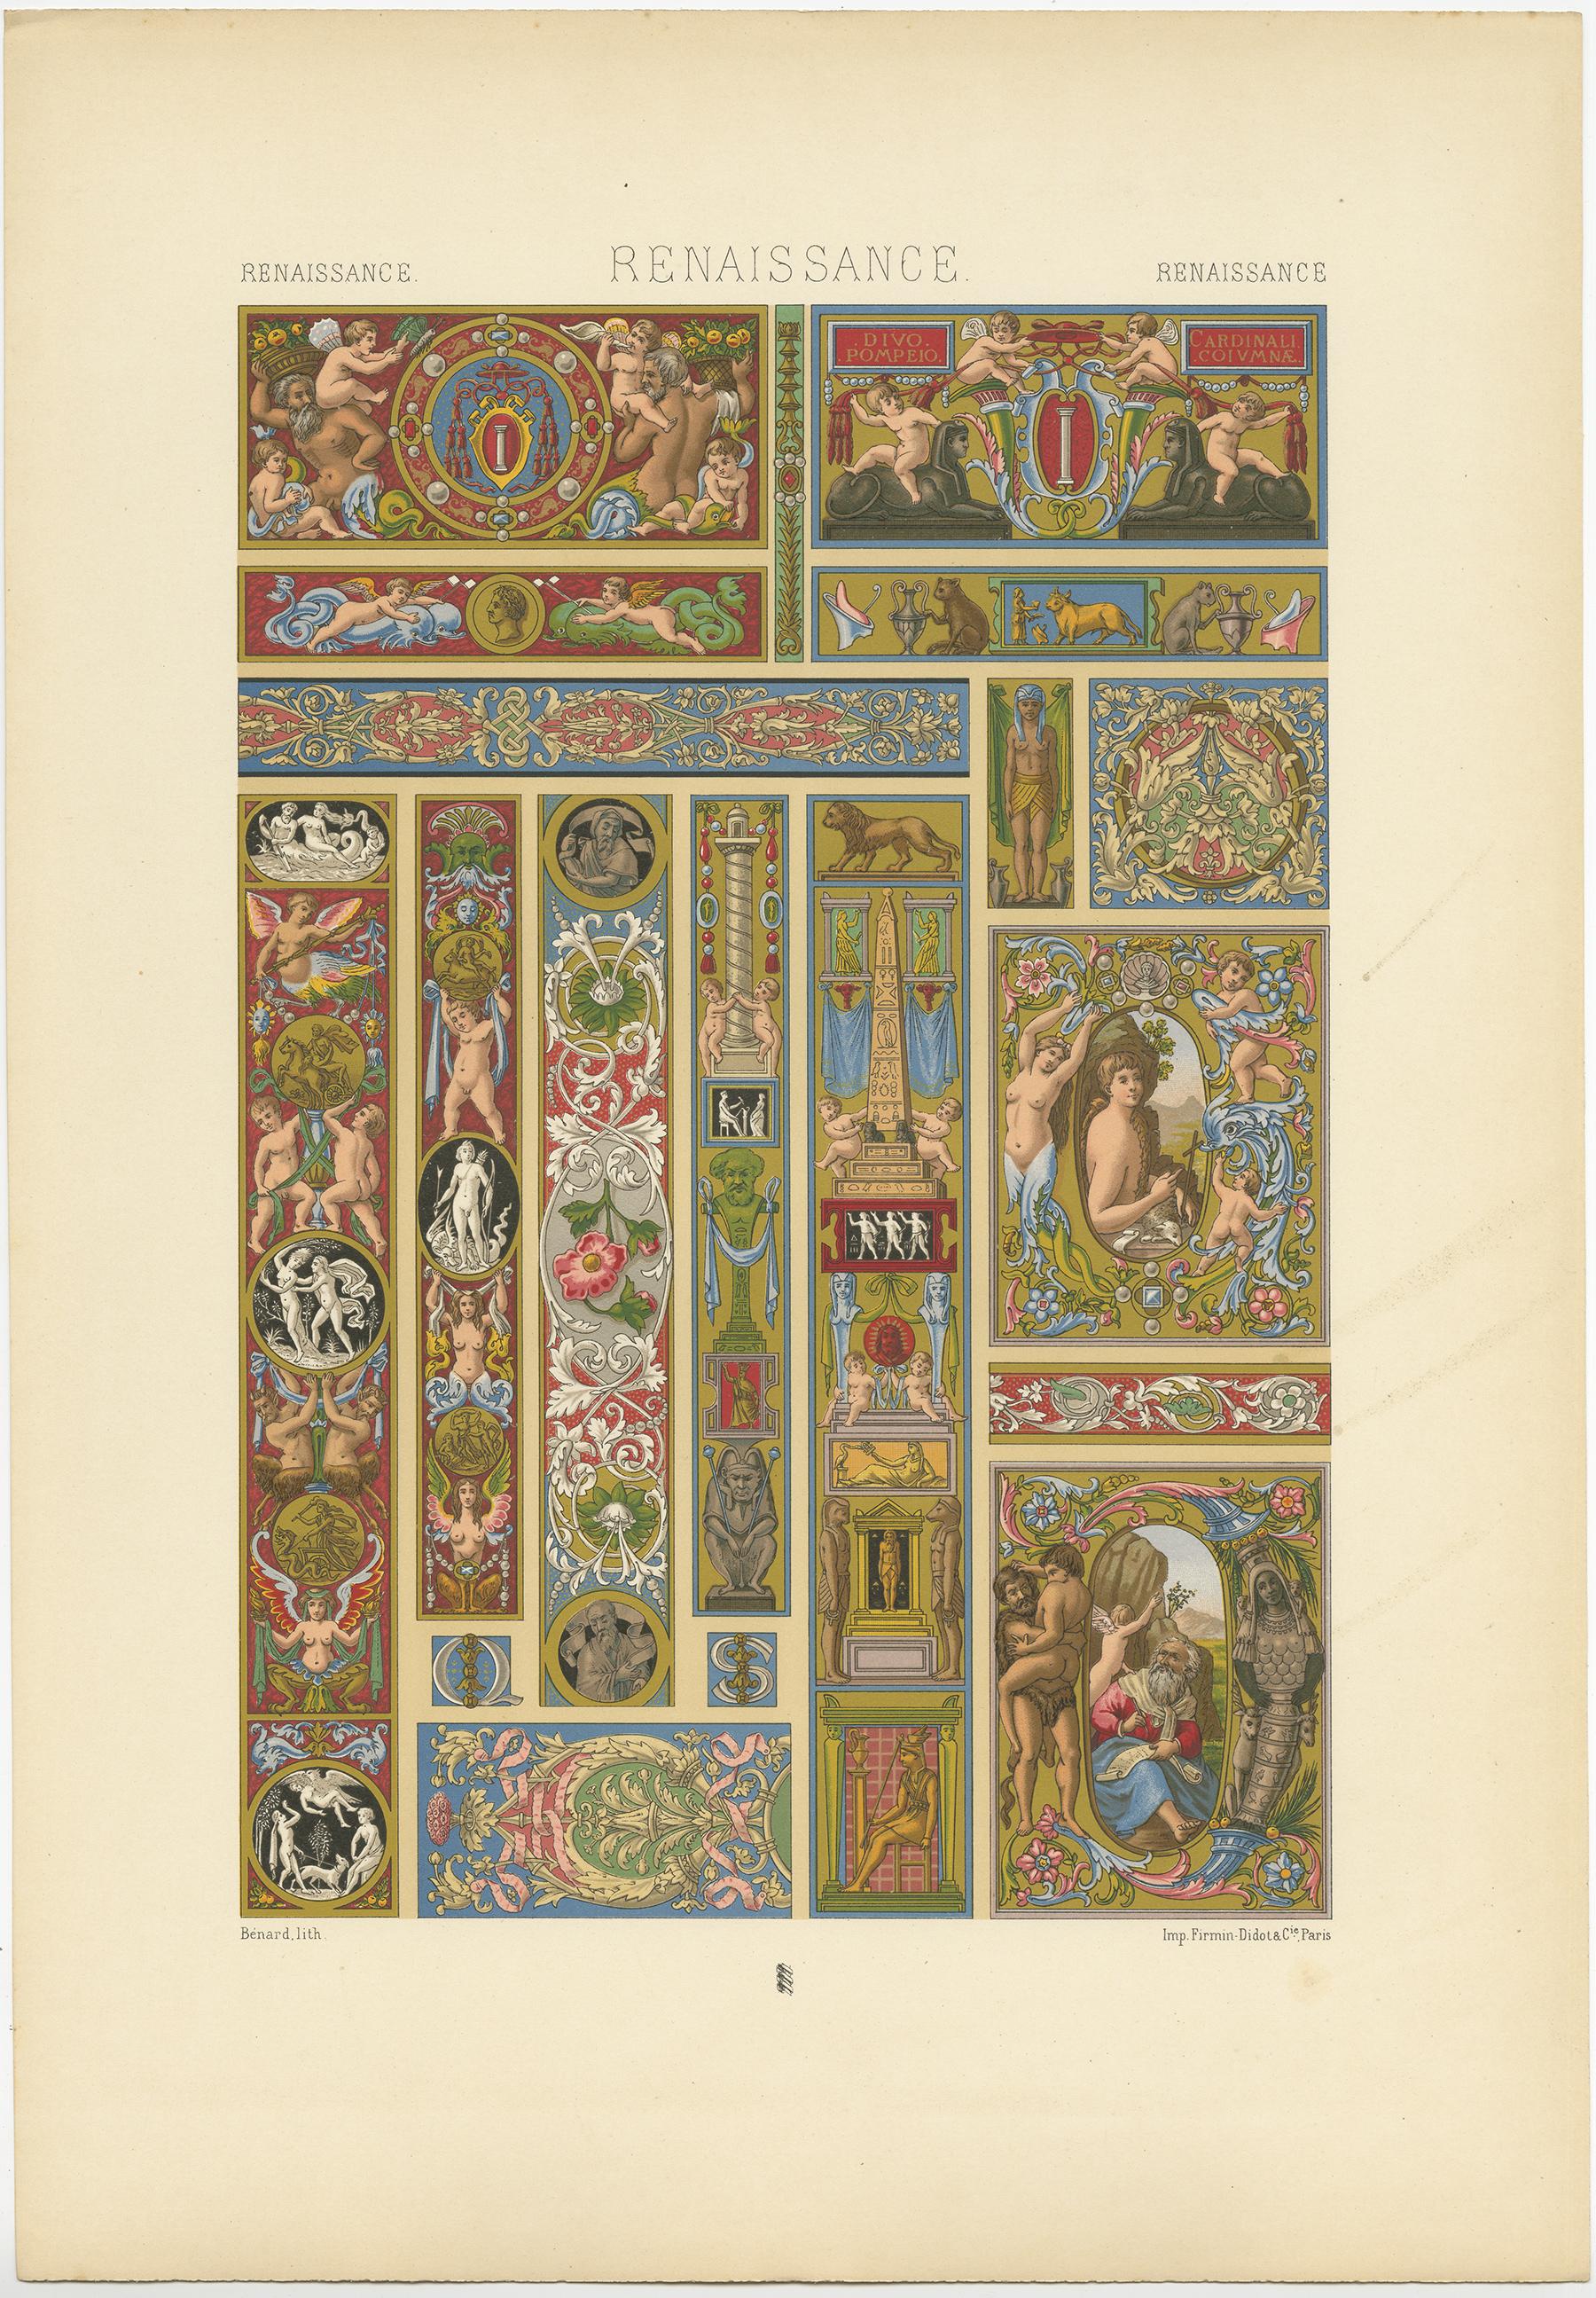 Antique print titled 'Renaissance - Renaissance - Renaissance'. Chromolithograph of ornaments from Italian manuscripts 16th and 17th centuries ornaments. This print originates from 'l'Ornement Polychrome' by Auguste Racinet. Published circa 1890.